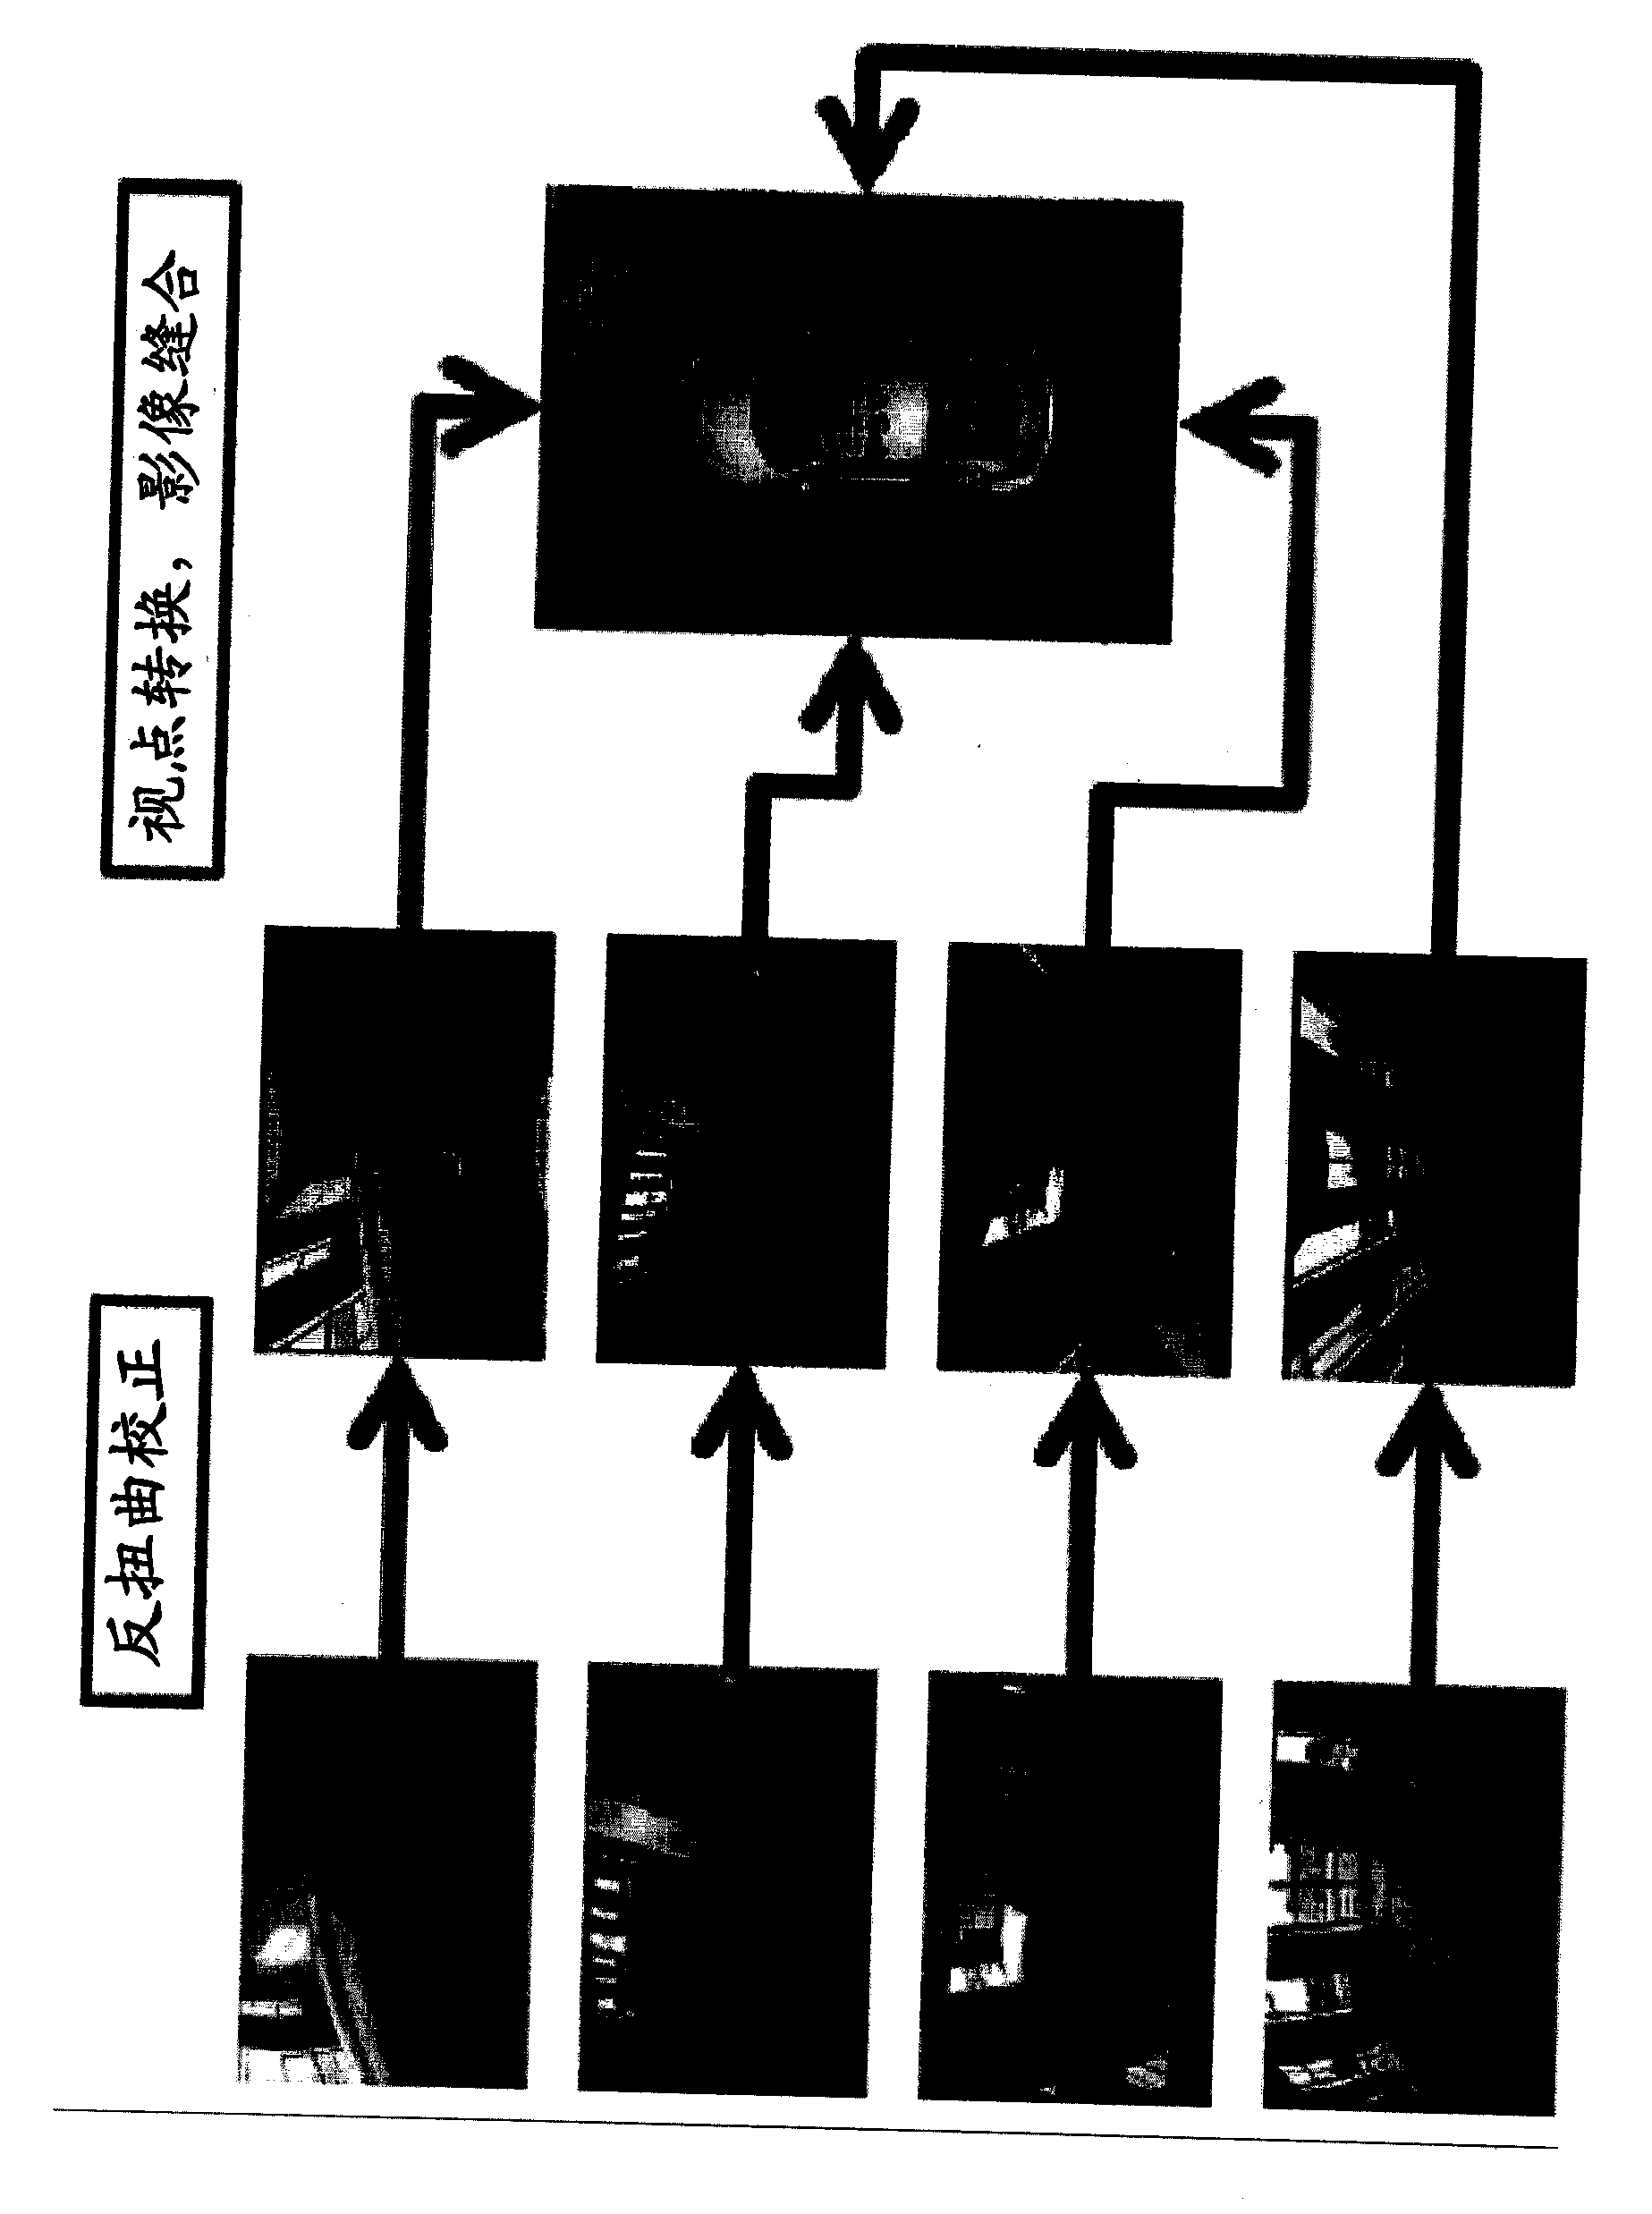 Method and system for adjusting vehicle imaging device